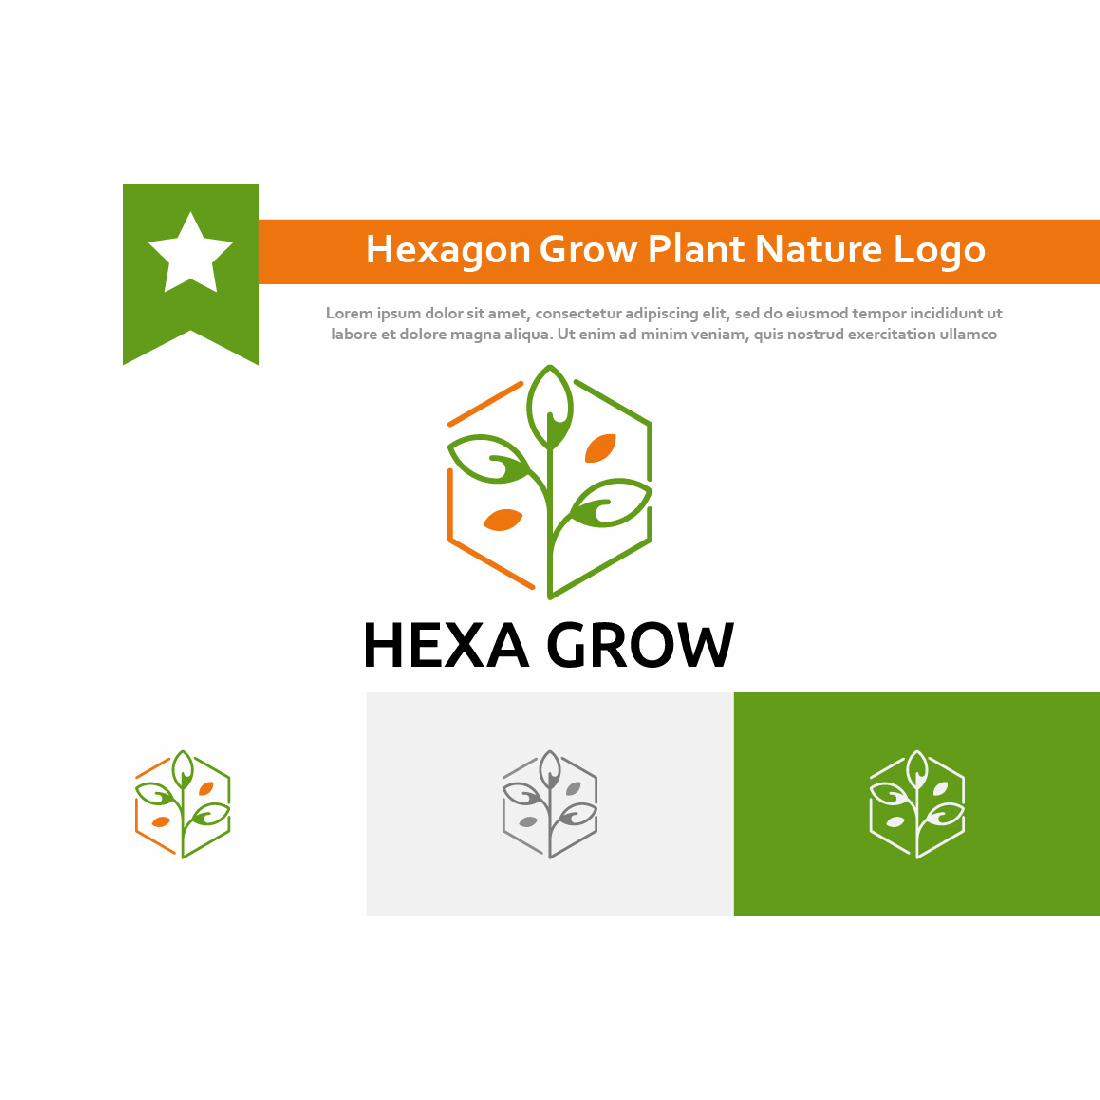 Hexagon Grow Plant Seed Nature Agriculture Logo Example.